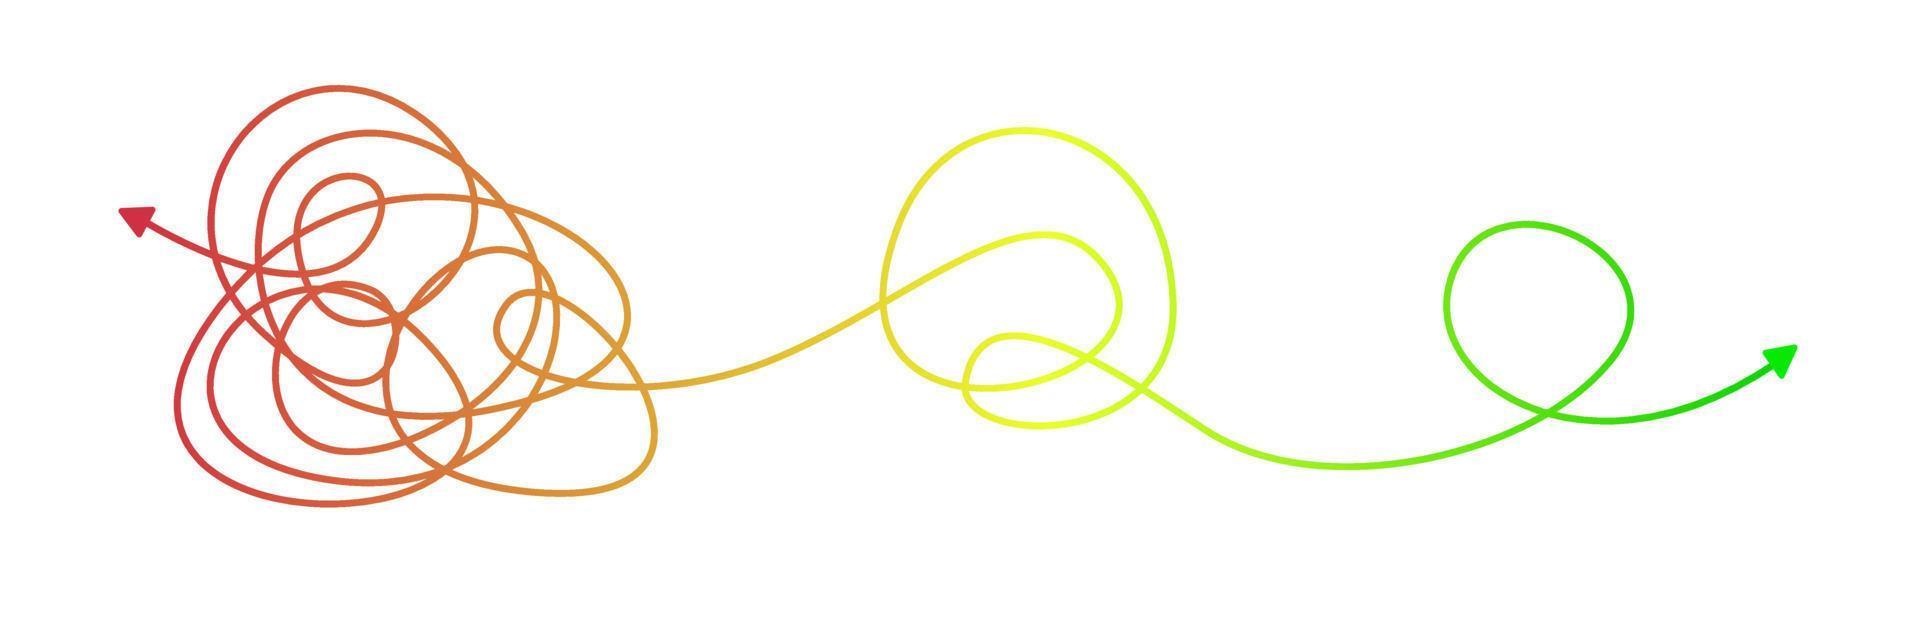 Chaos solving. Tangled line turn into straight line as a concept of chaos solving. Vector illustration